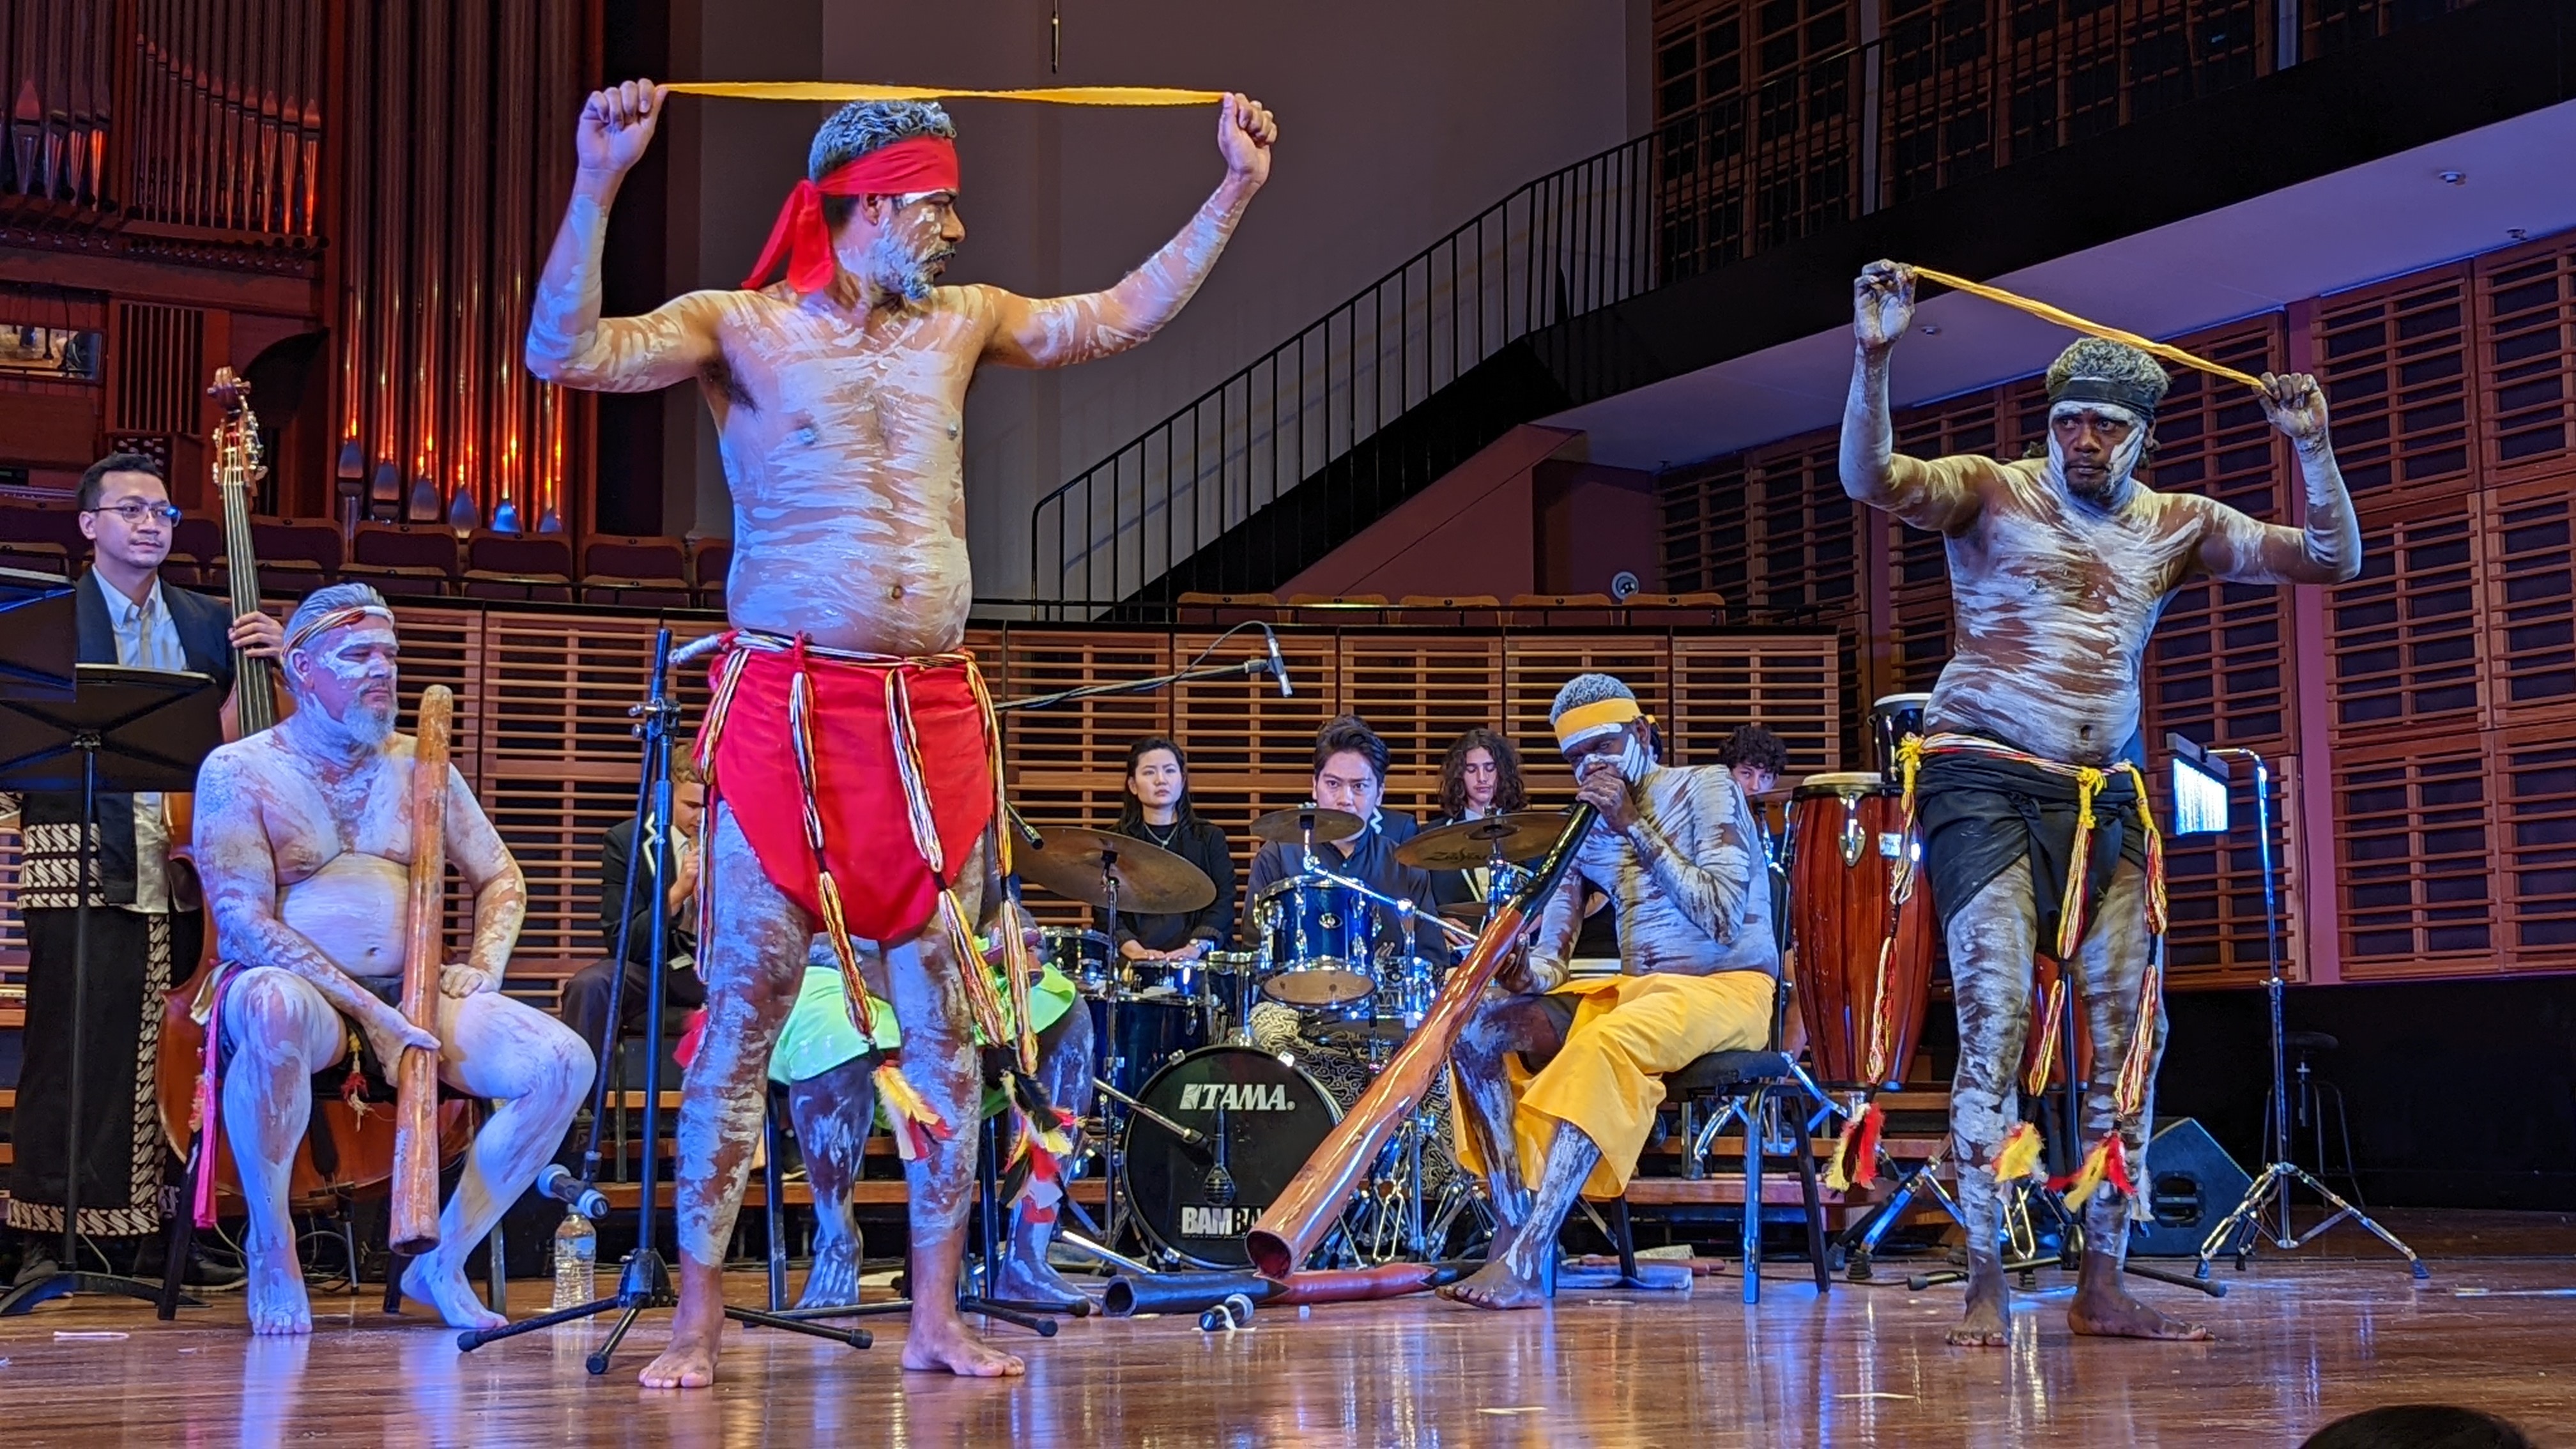 Yolngu man, Arian Pearson (standing, left) performs an aboriginal dance representing the colors brought by the Macassan people.